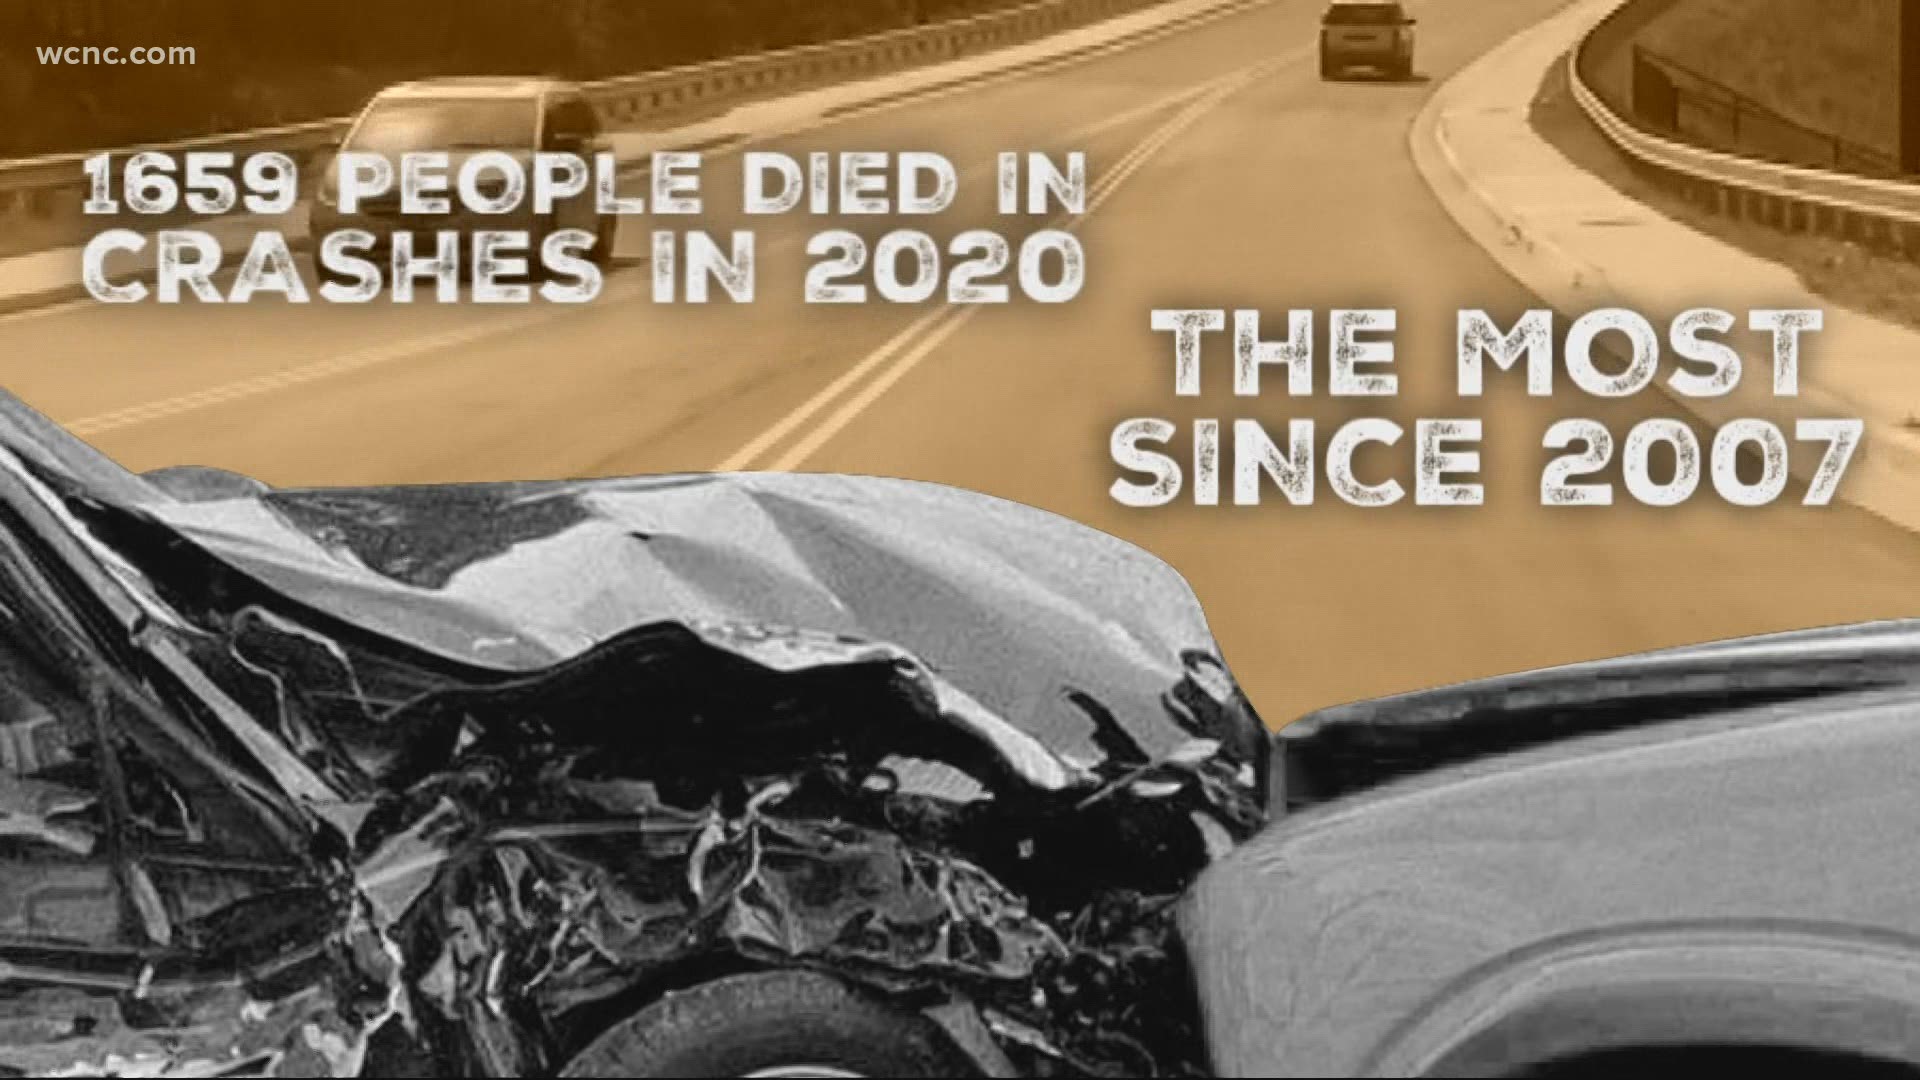 The number of people who lost their lives in vehicle crashes in North Carolina in 2020 was the highest its been since 2007.